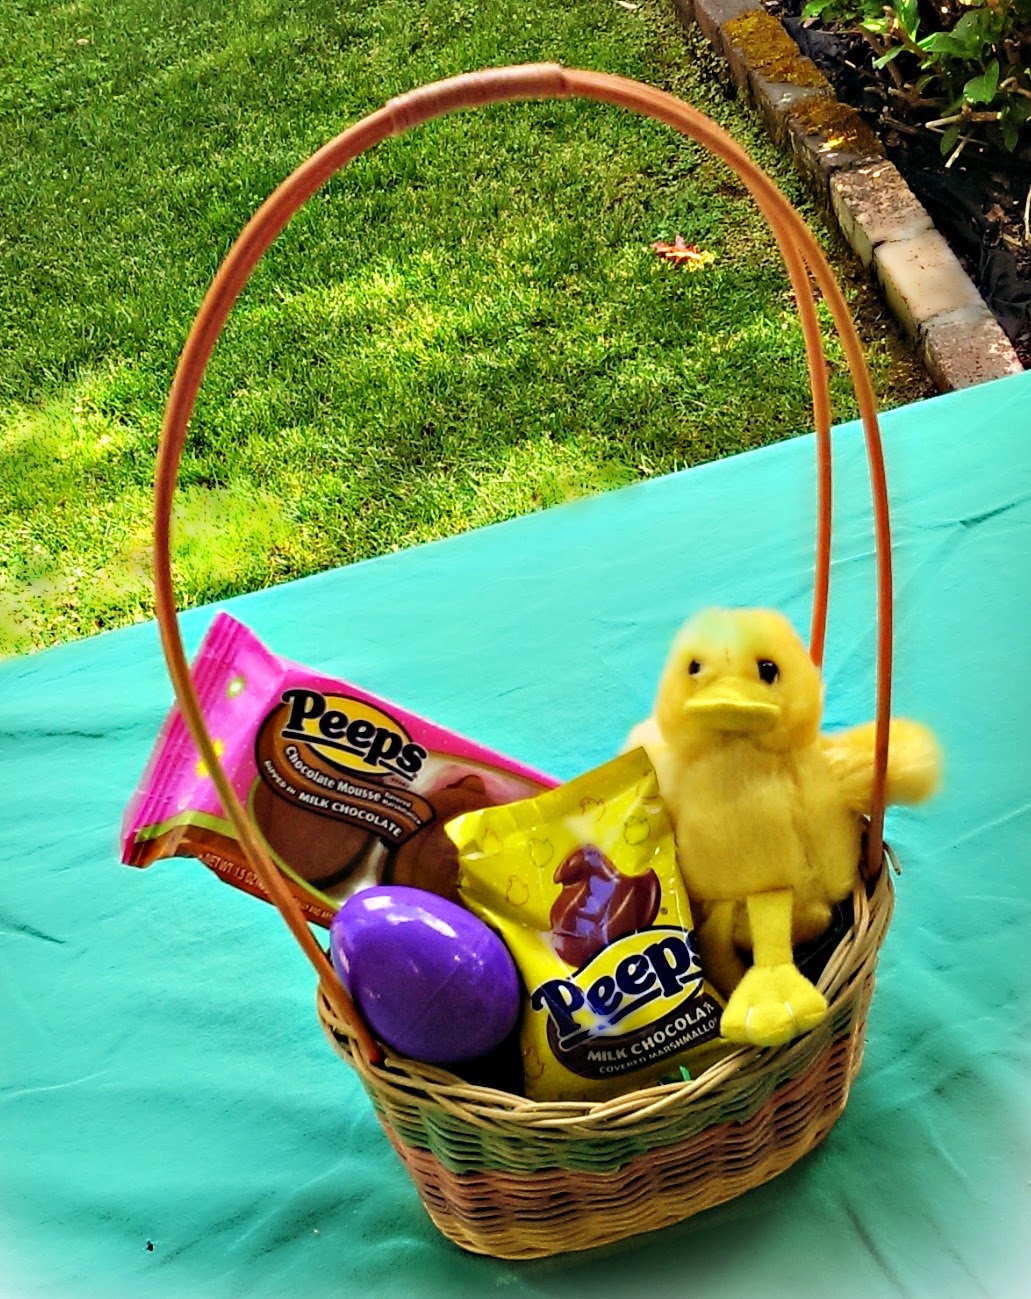 Peeps candy Easter gift baskets